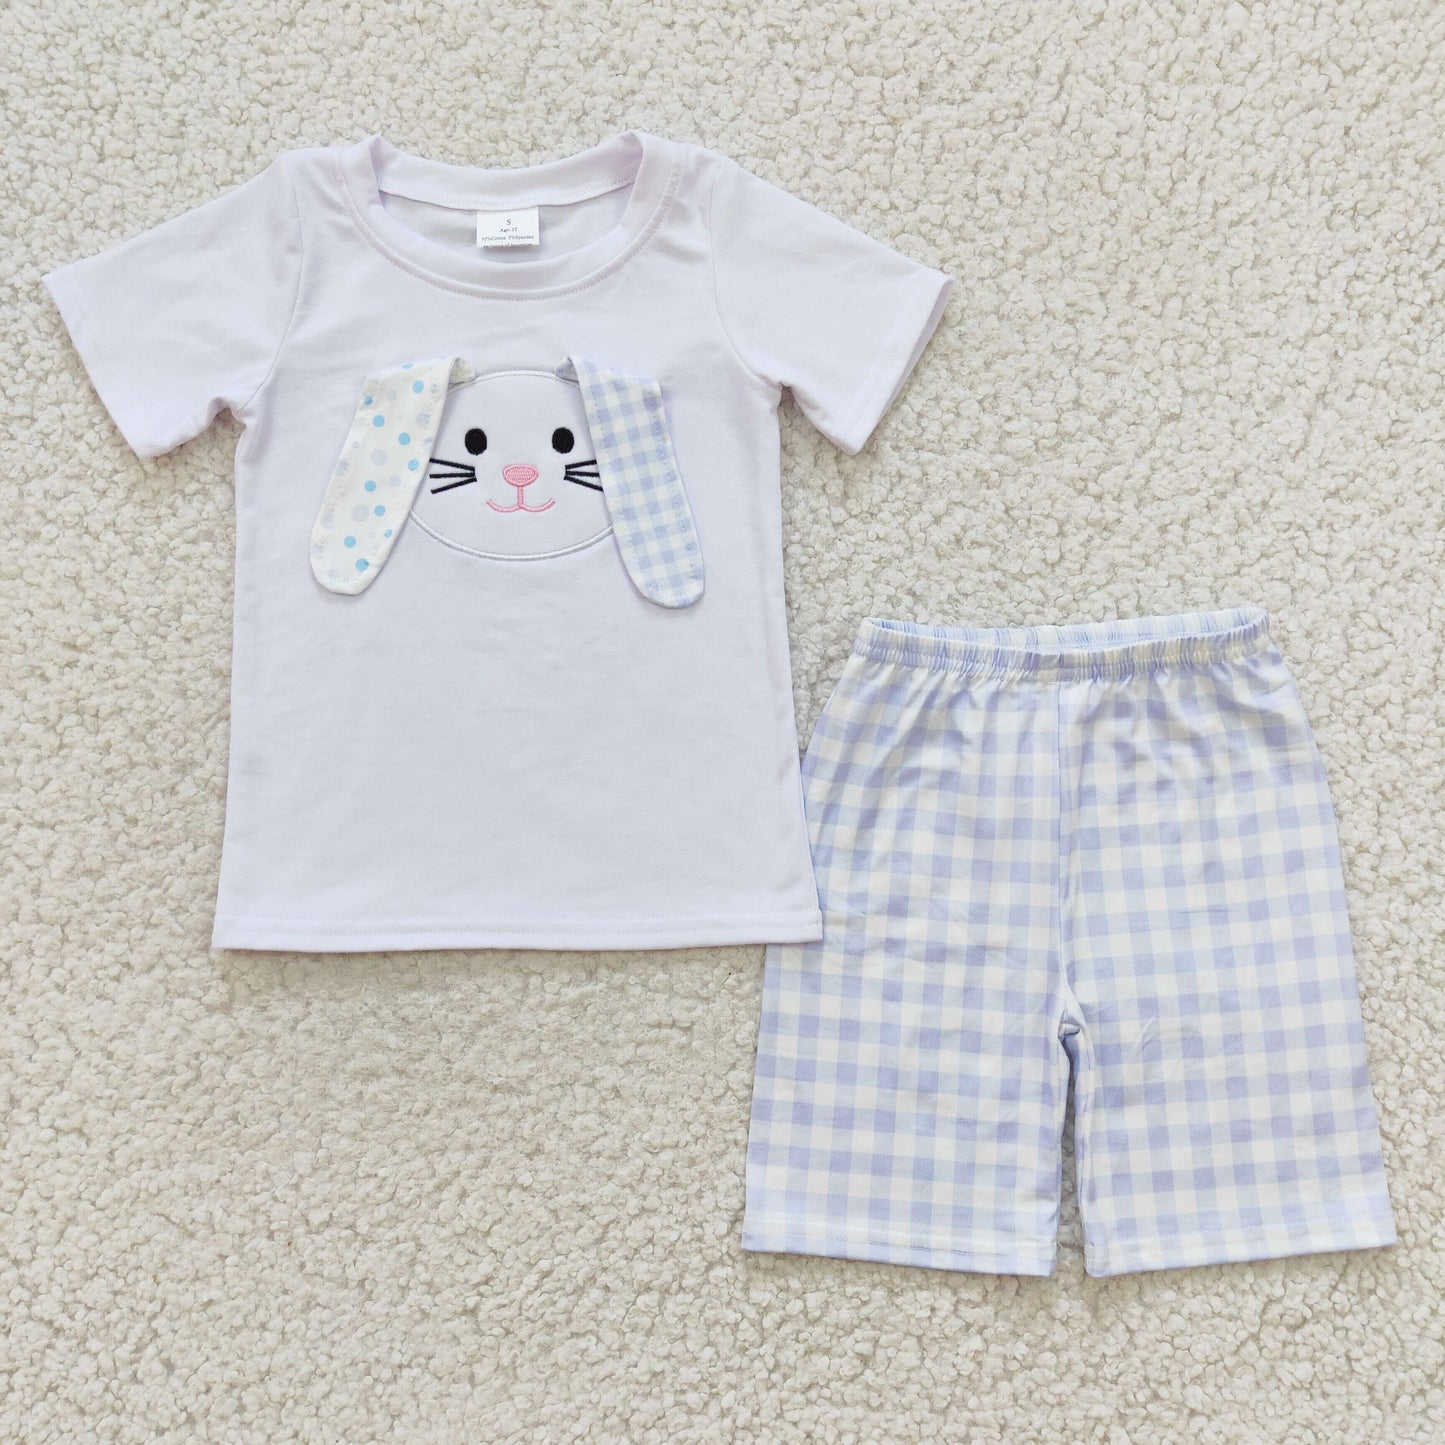 Easter white pink rabbit embroidery shorts set girl